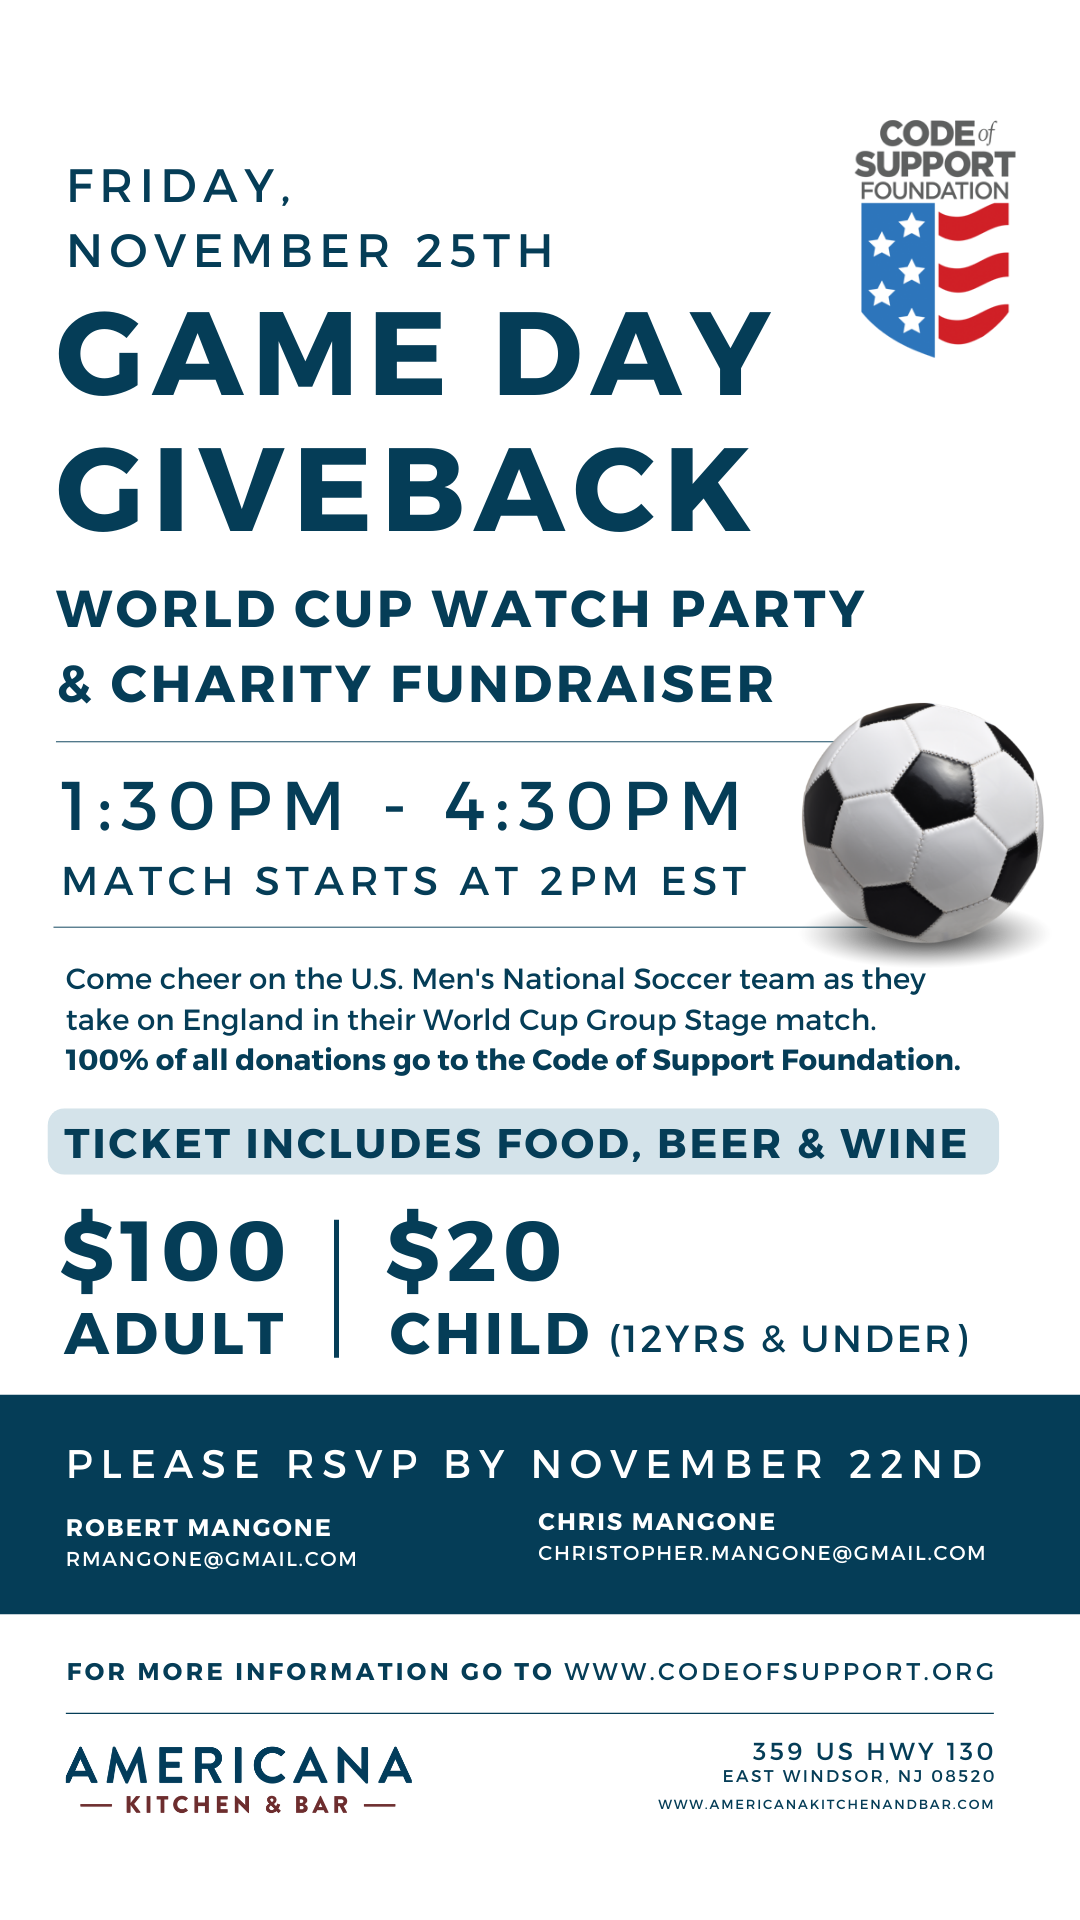 WORLD CUP WATCH PARTY & FUNDRAISER AT AMERICANA KITCHEN AND BAR